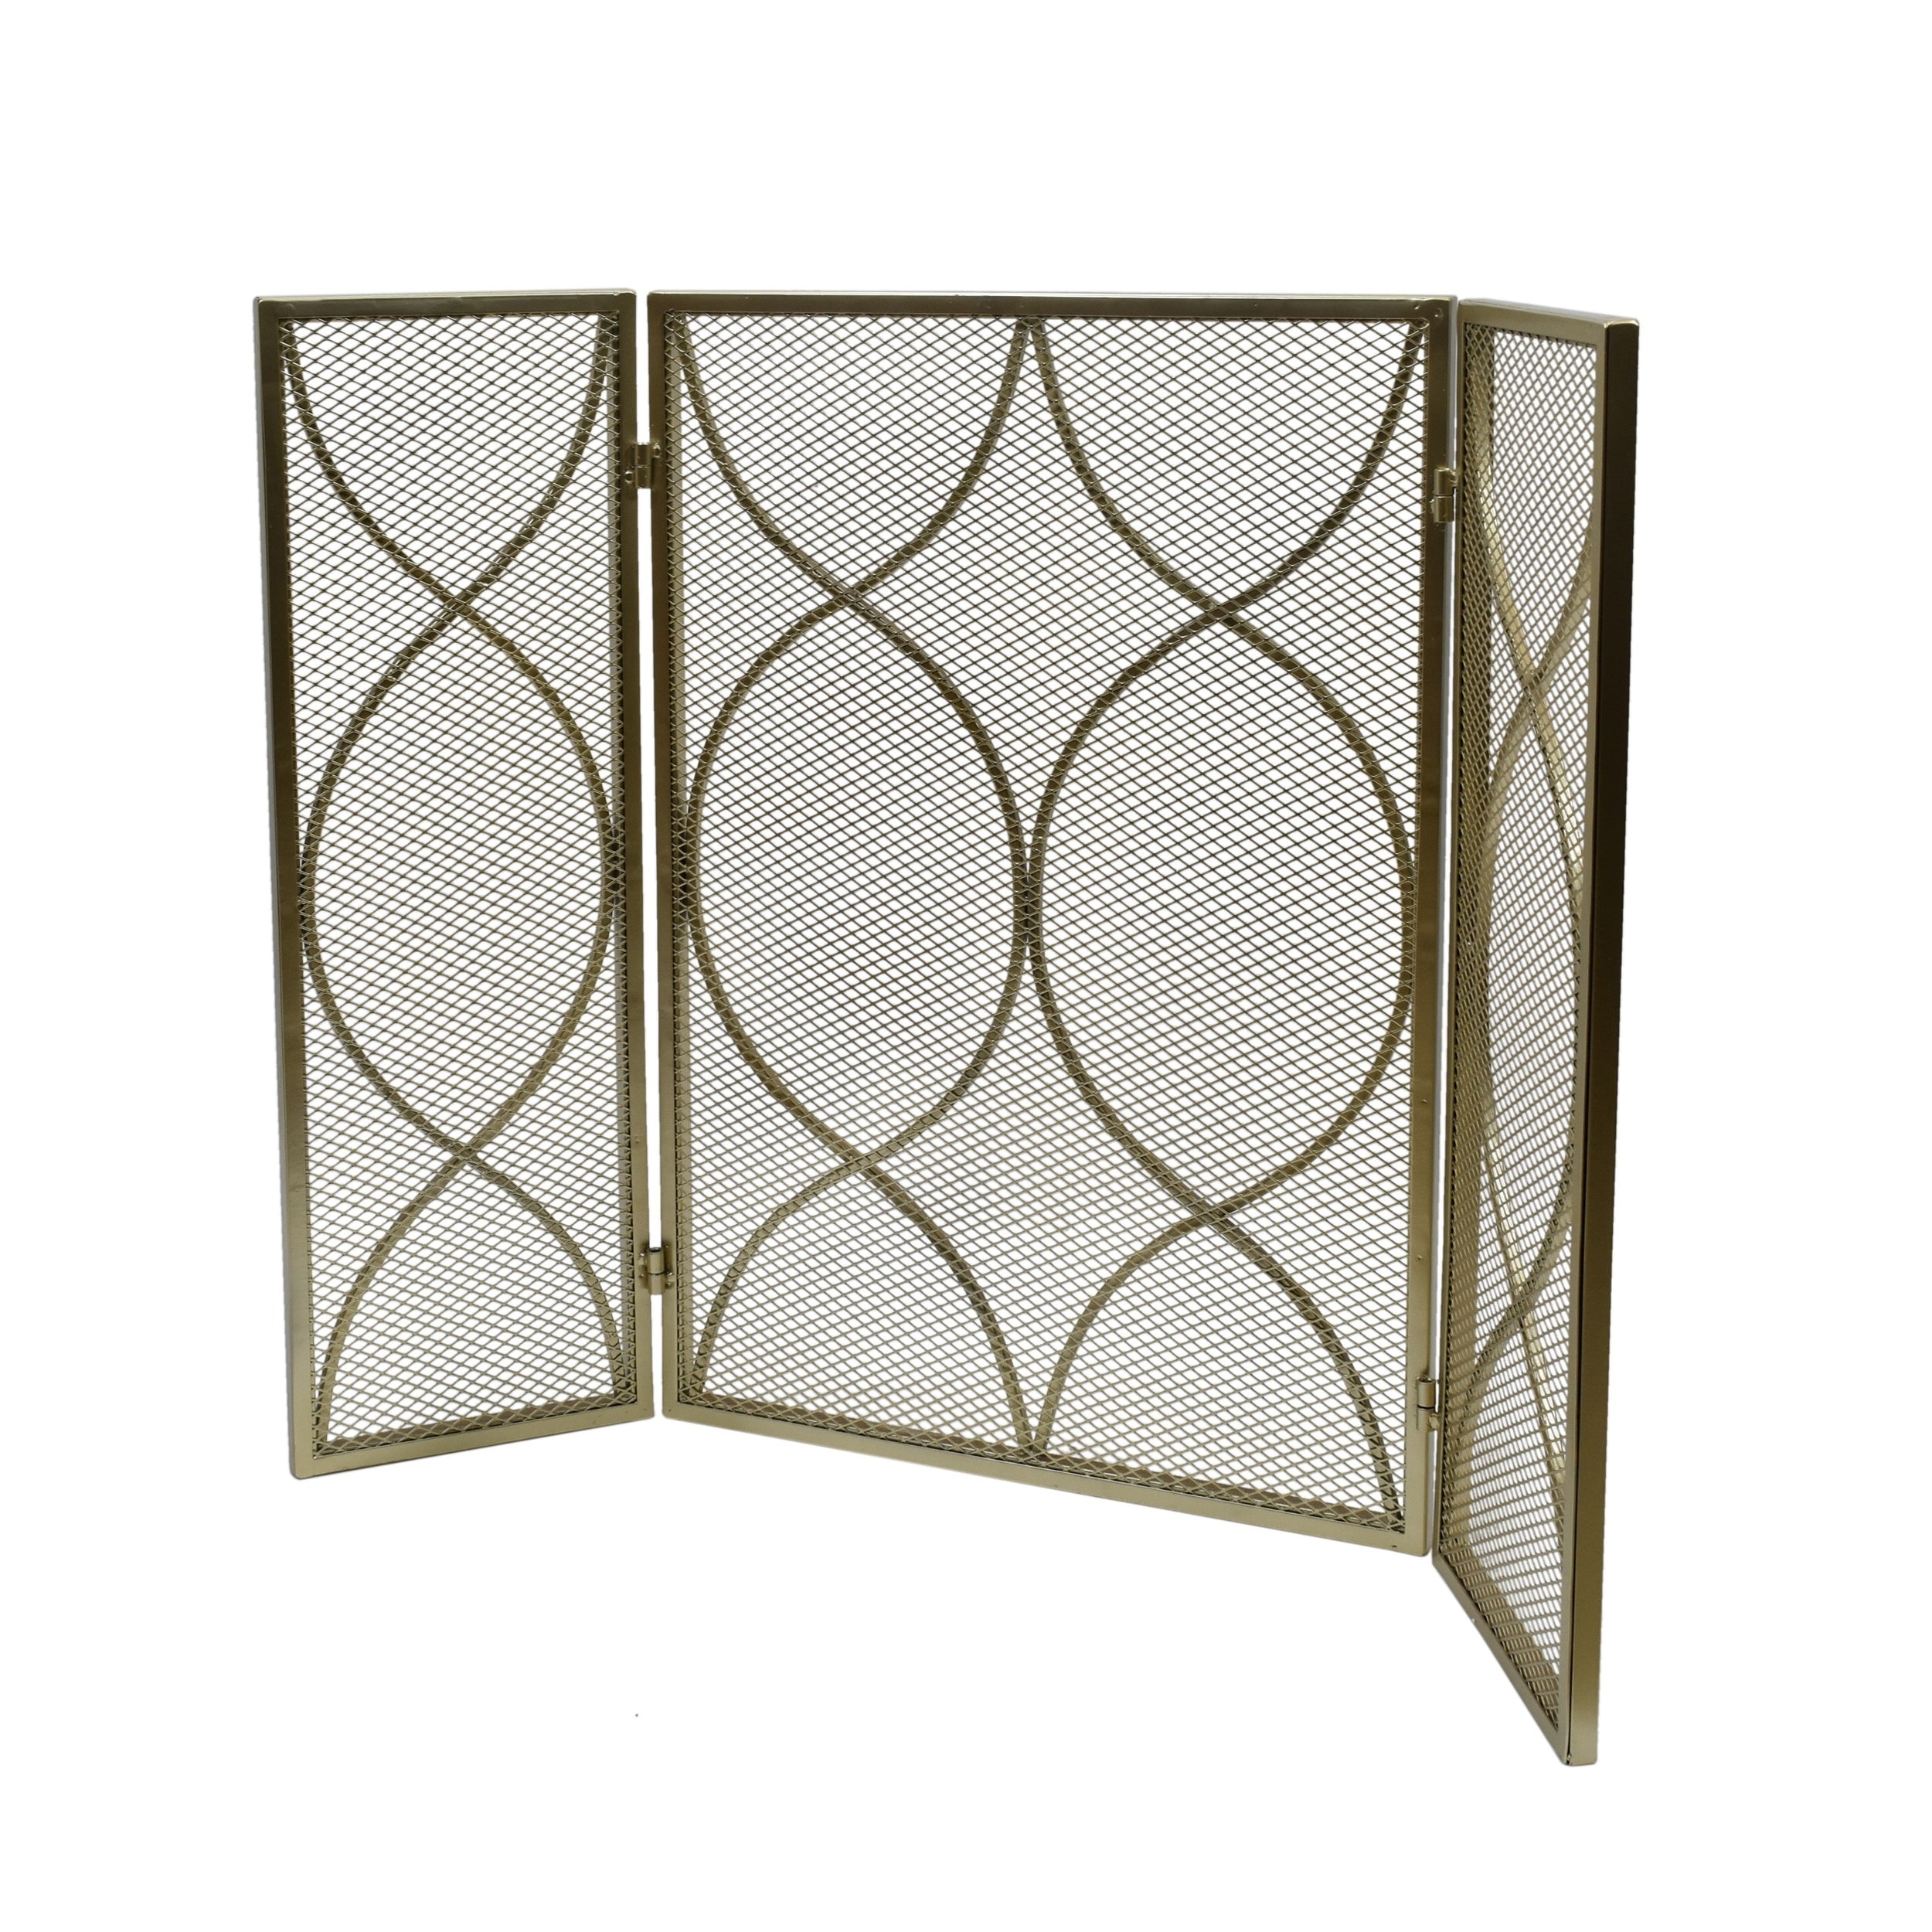 Pleasants Modern Three Panel Fireplace screen by Christopher Knight Home  1.25W x 41.00L x 29.75H Bed Bath  Beyond 27569250